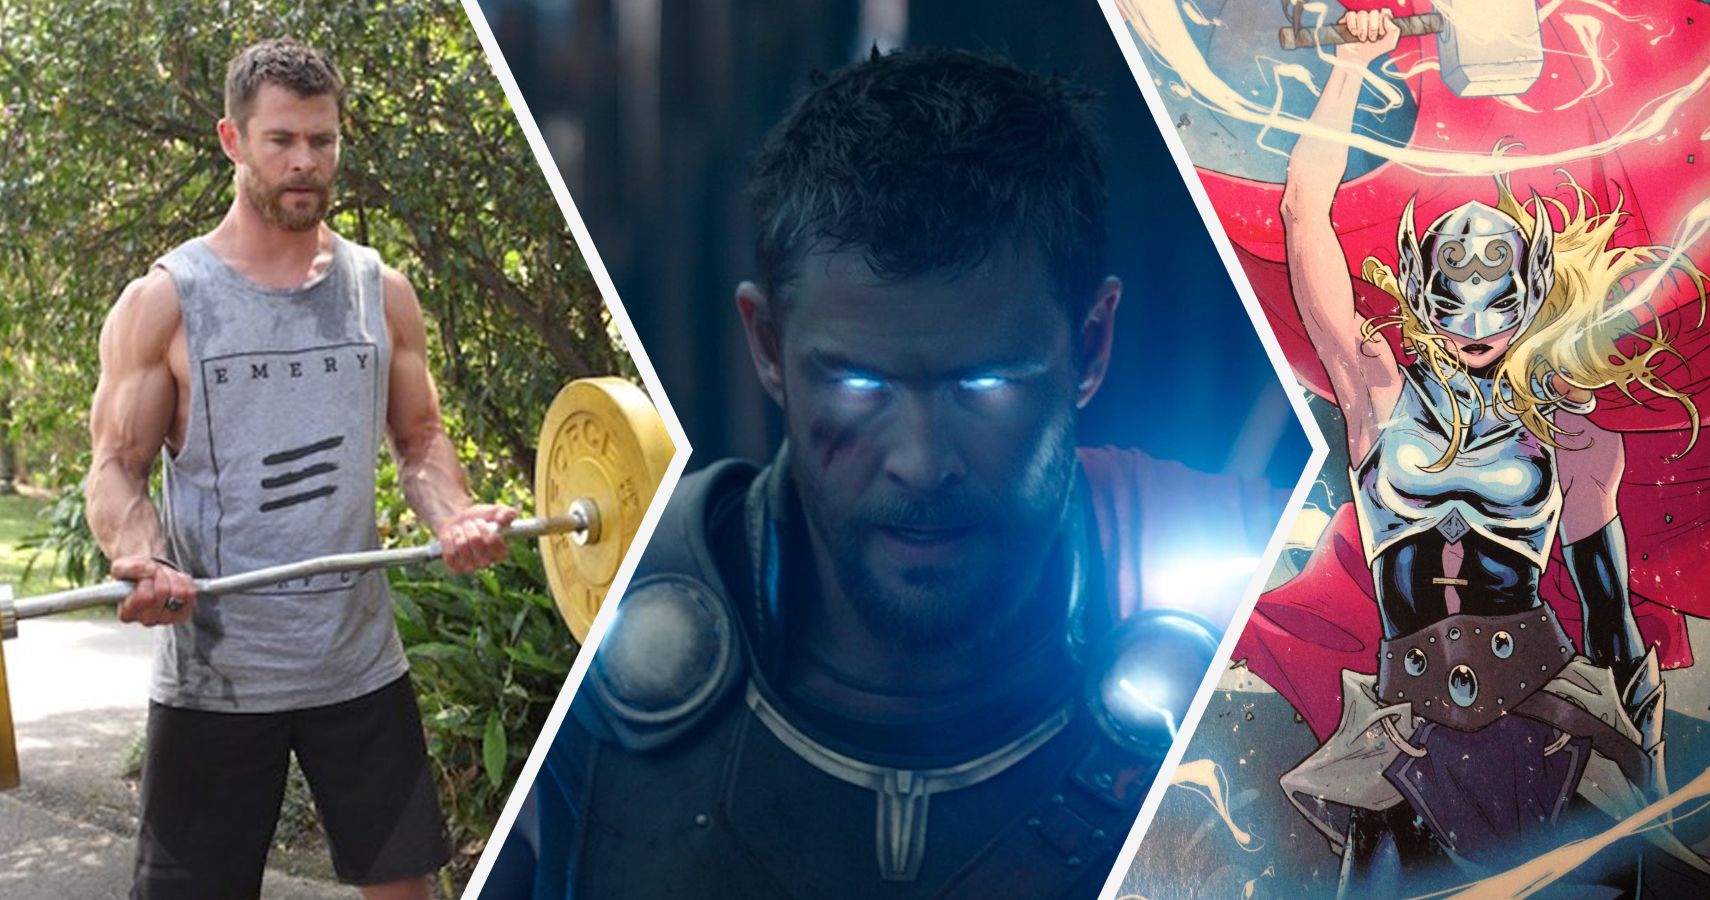 15 Crazy Facts Only True Fans Know About Thor’s Body